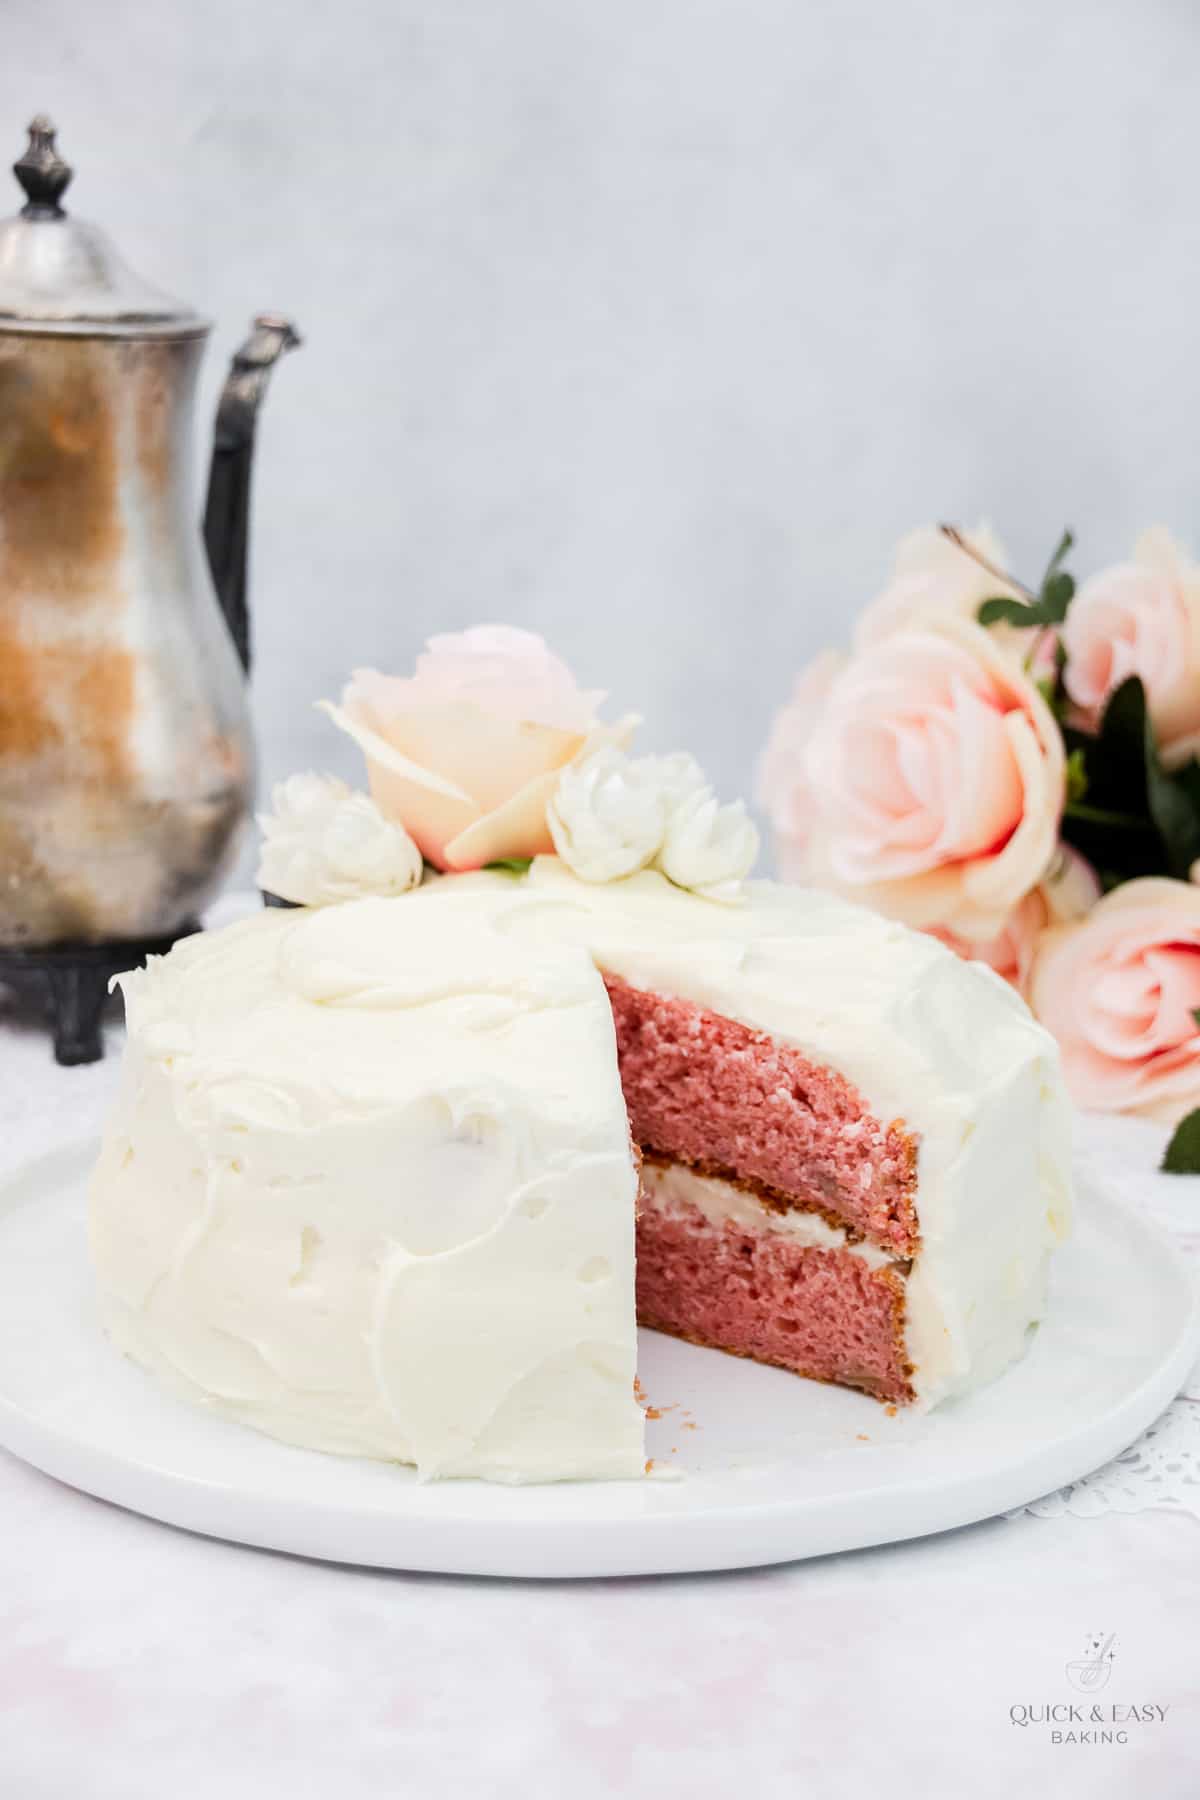 Decorated pink cake with white frosting and flowers.